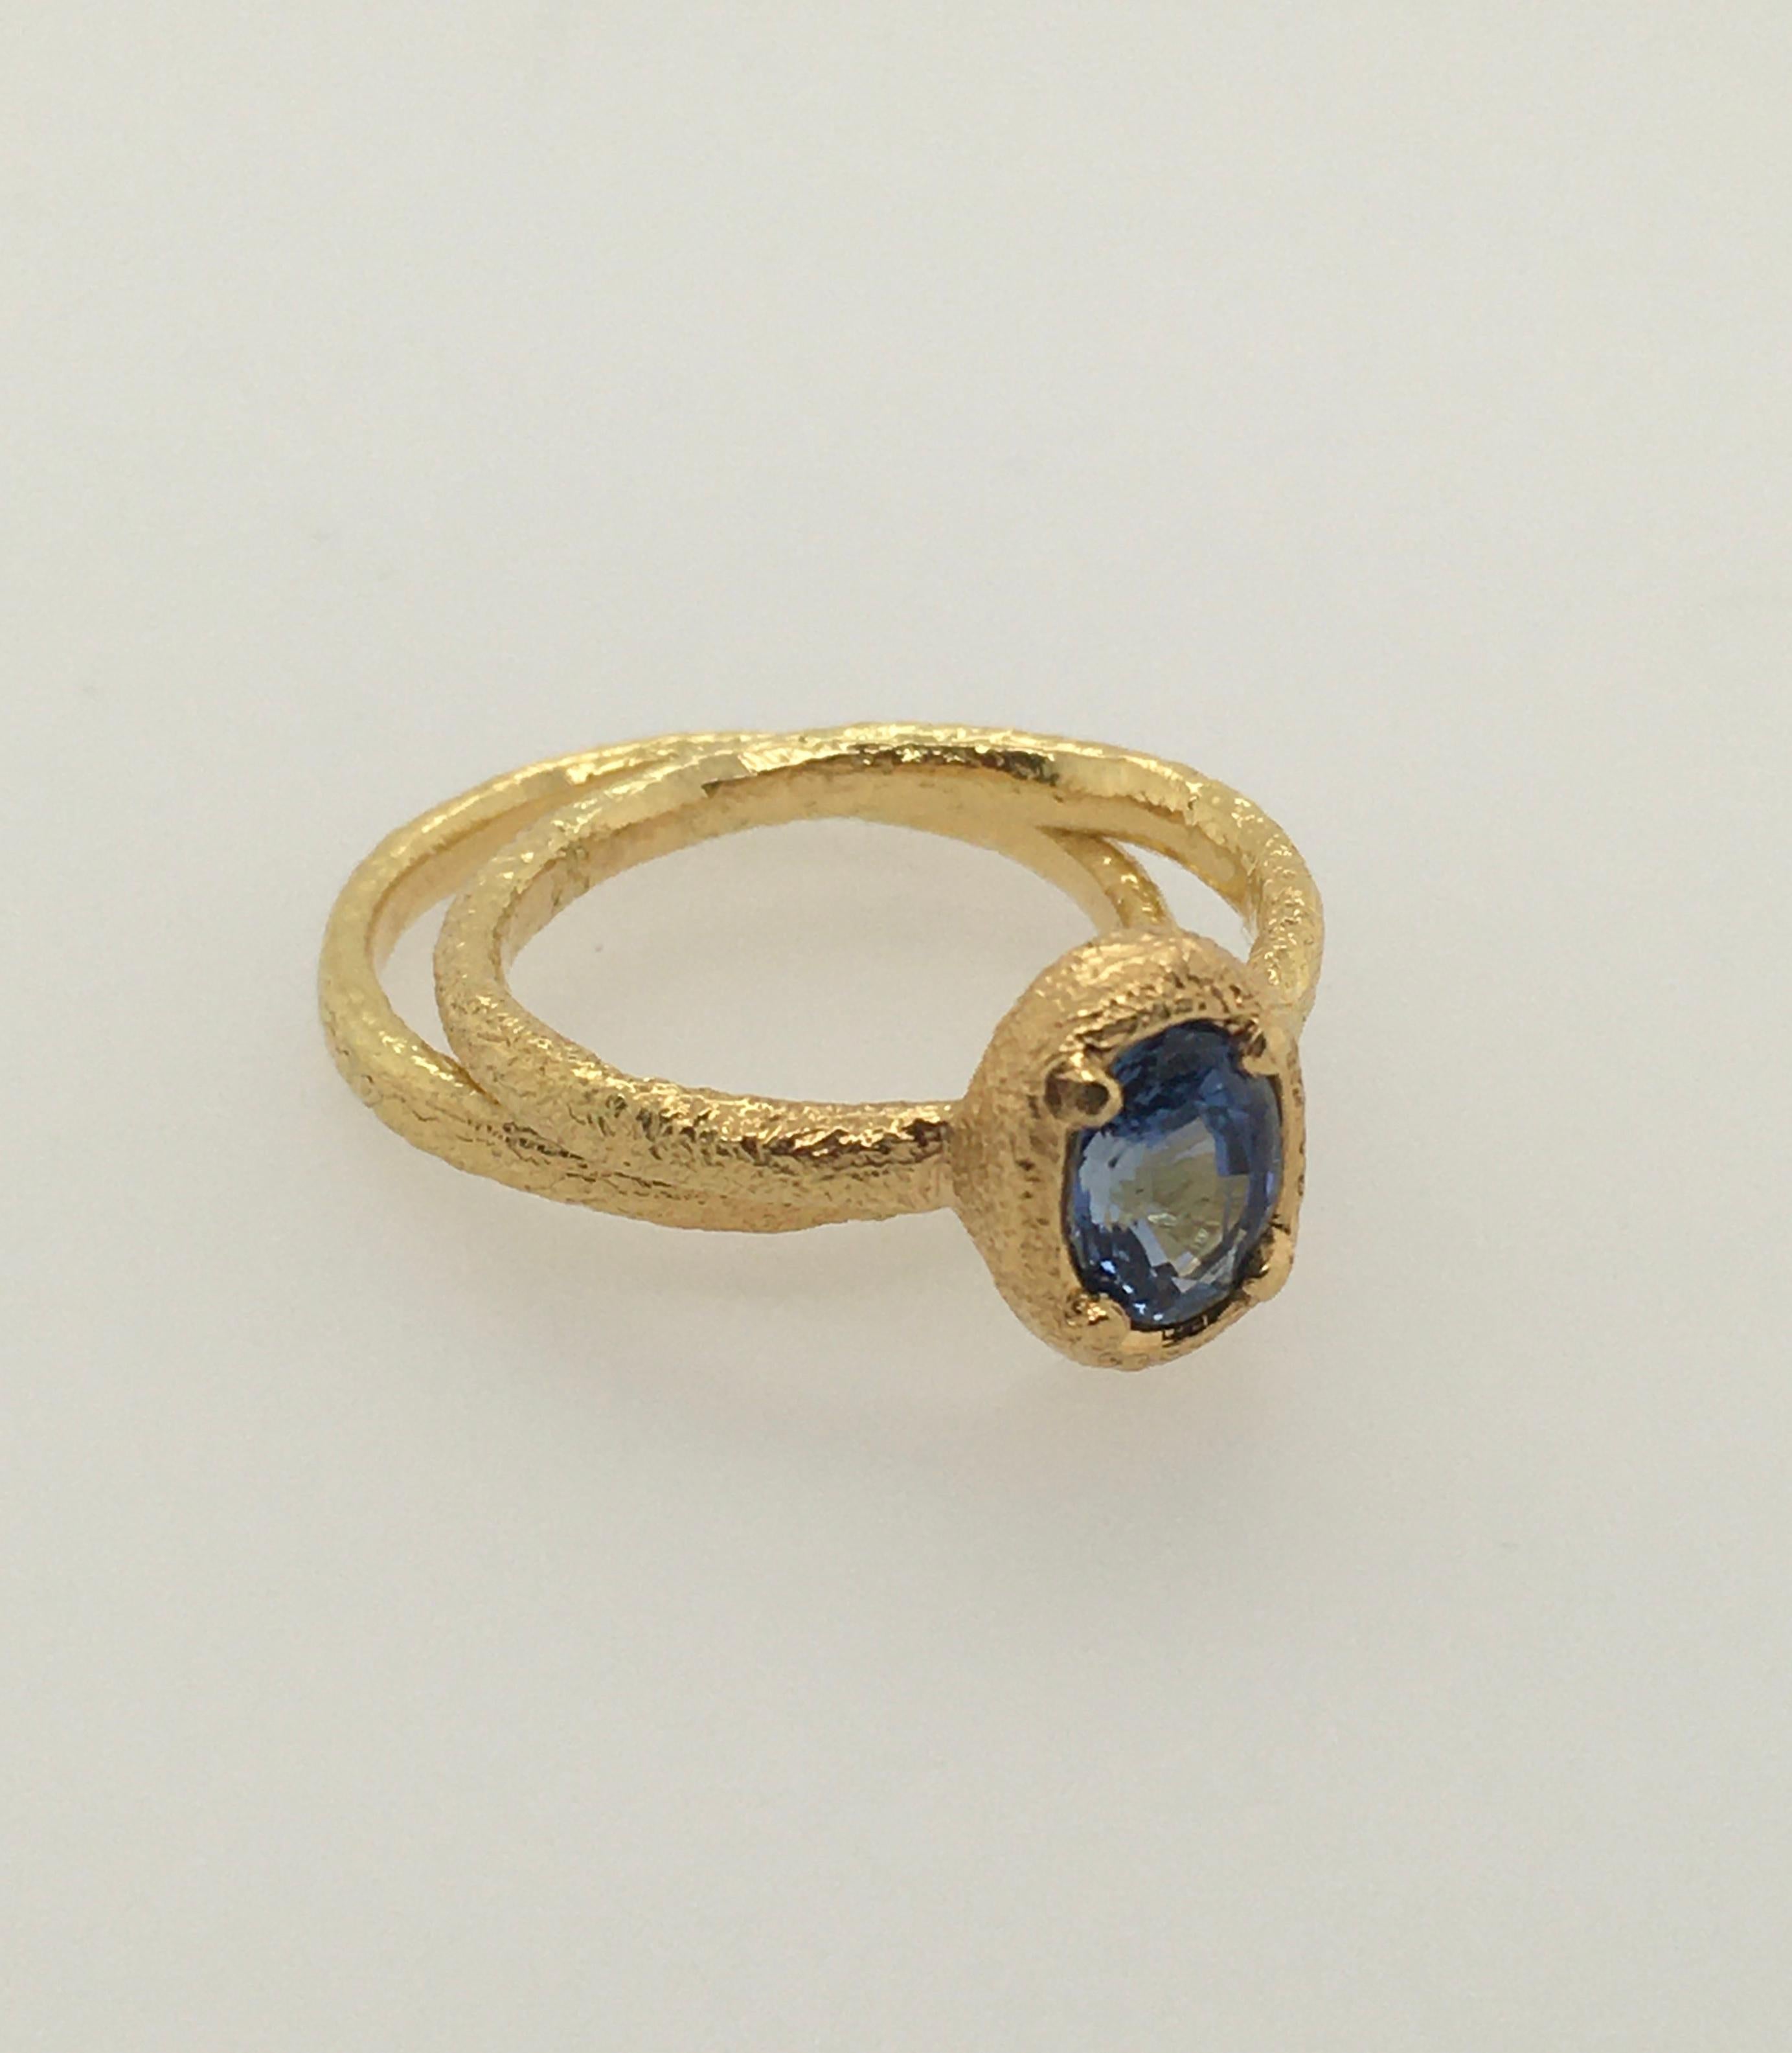 PATRICIA DAUNIS Ceylon Blue Sapphire Set in Hand-textured Gold Atuik Ring  For Sale 1